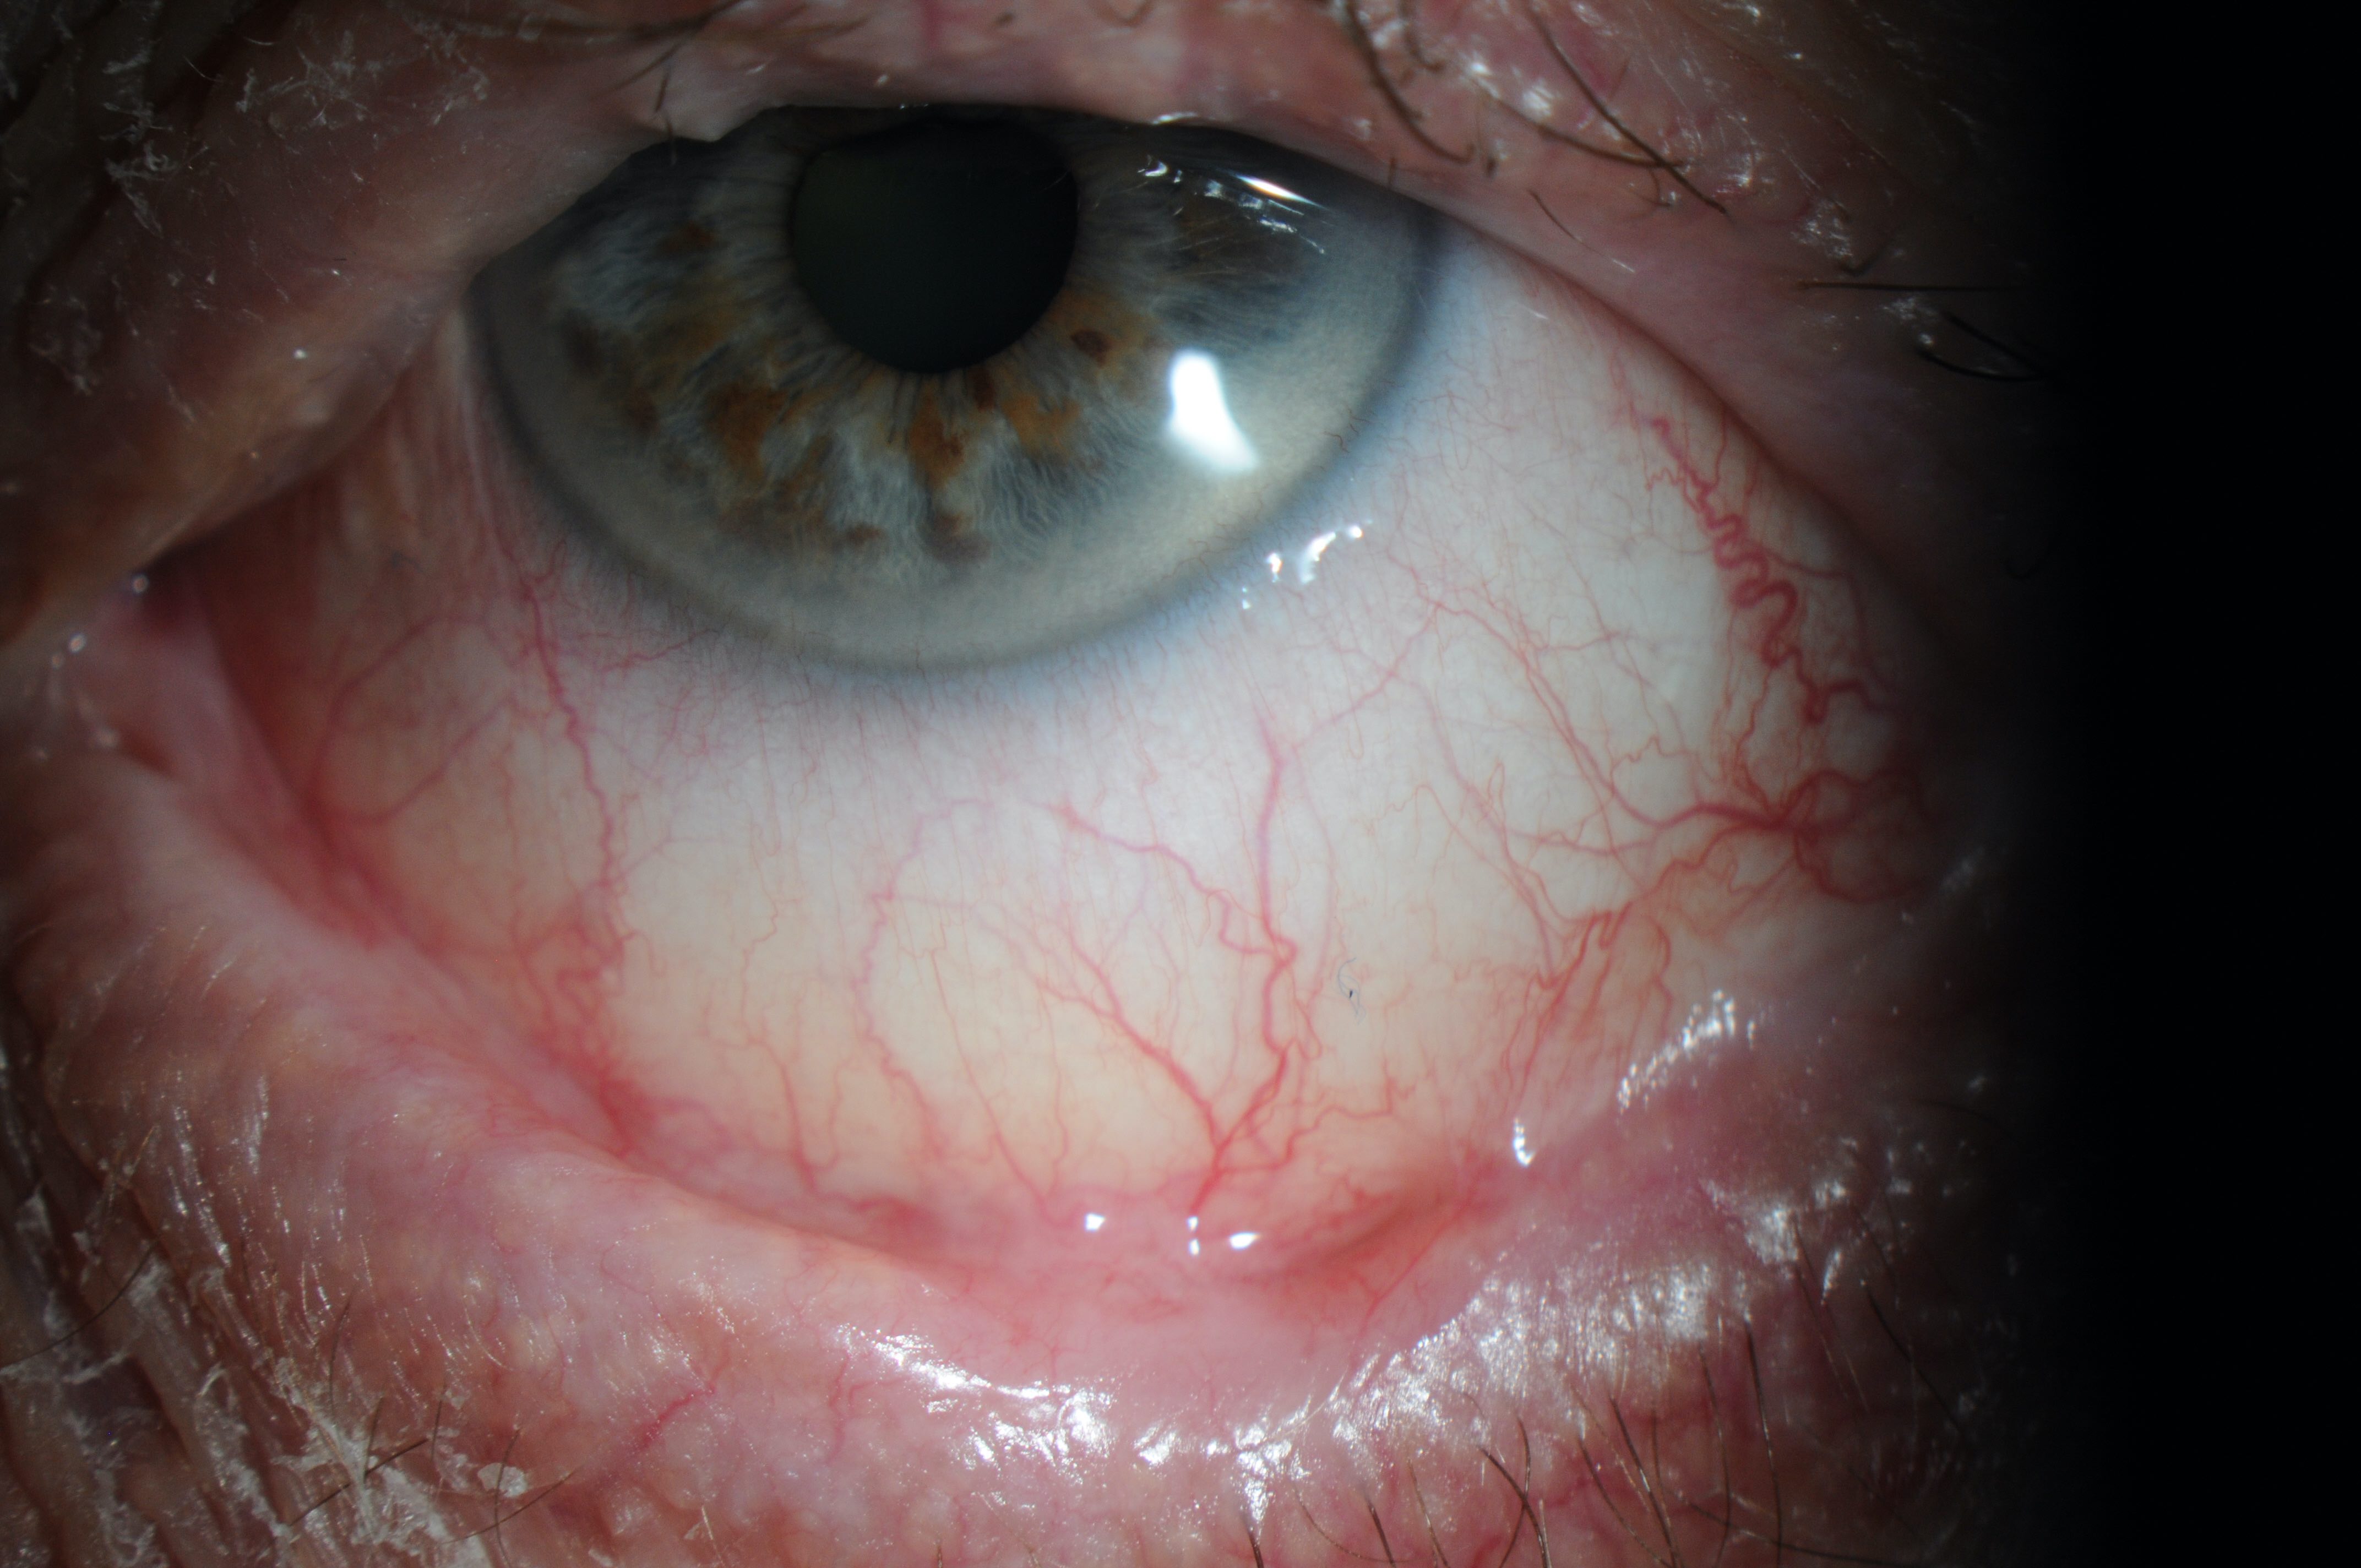 Atypical features such as chronic symptoms, relapsing/remitting course, and signs such as symblepharon, loss of the plica, shortening of conjunctival fornices suggest a non-viral cause of conjunctivitis.